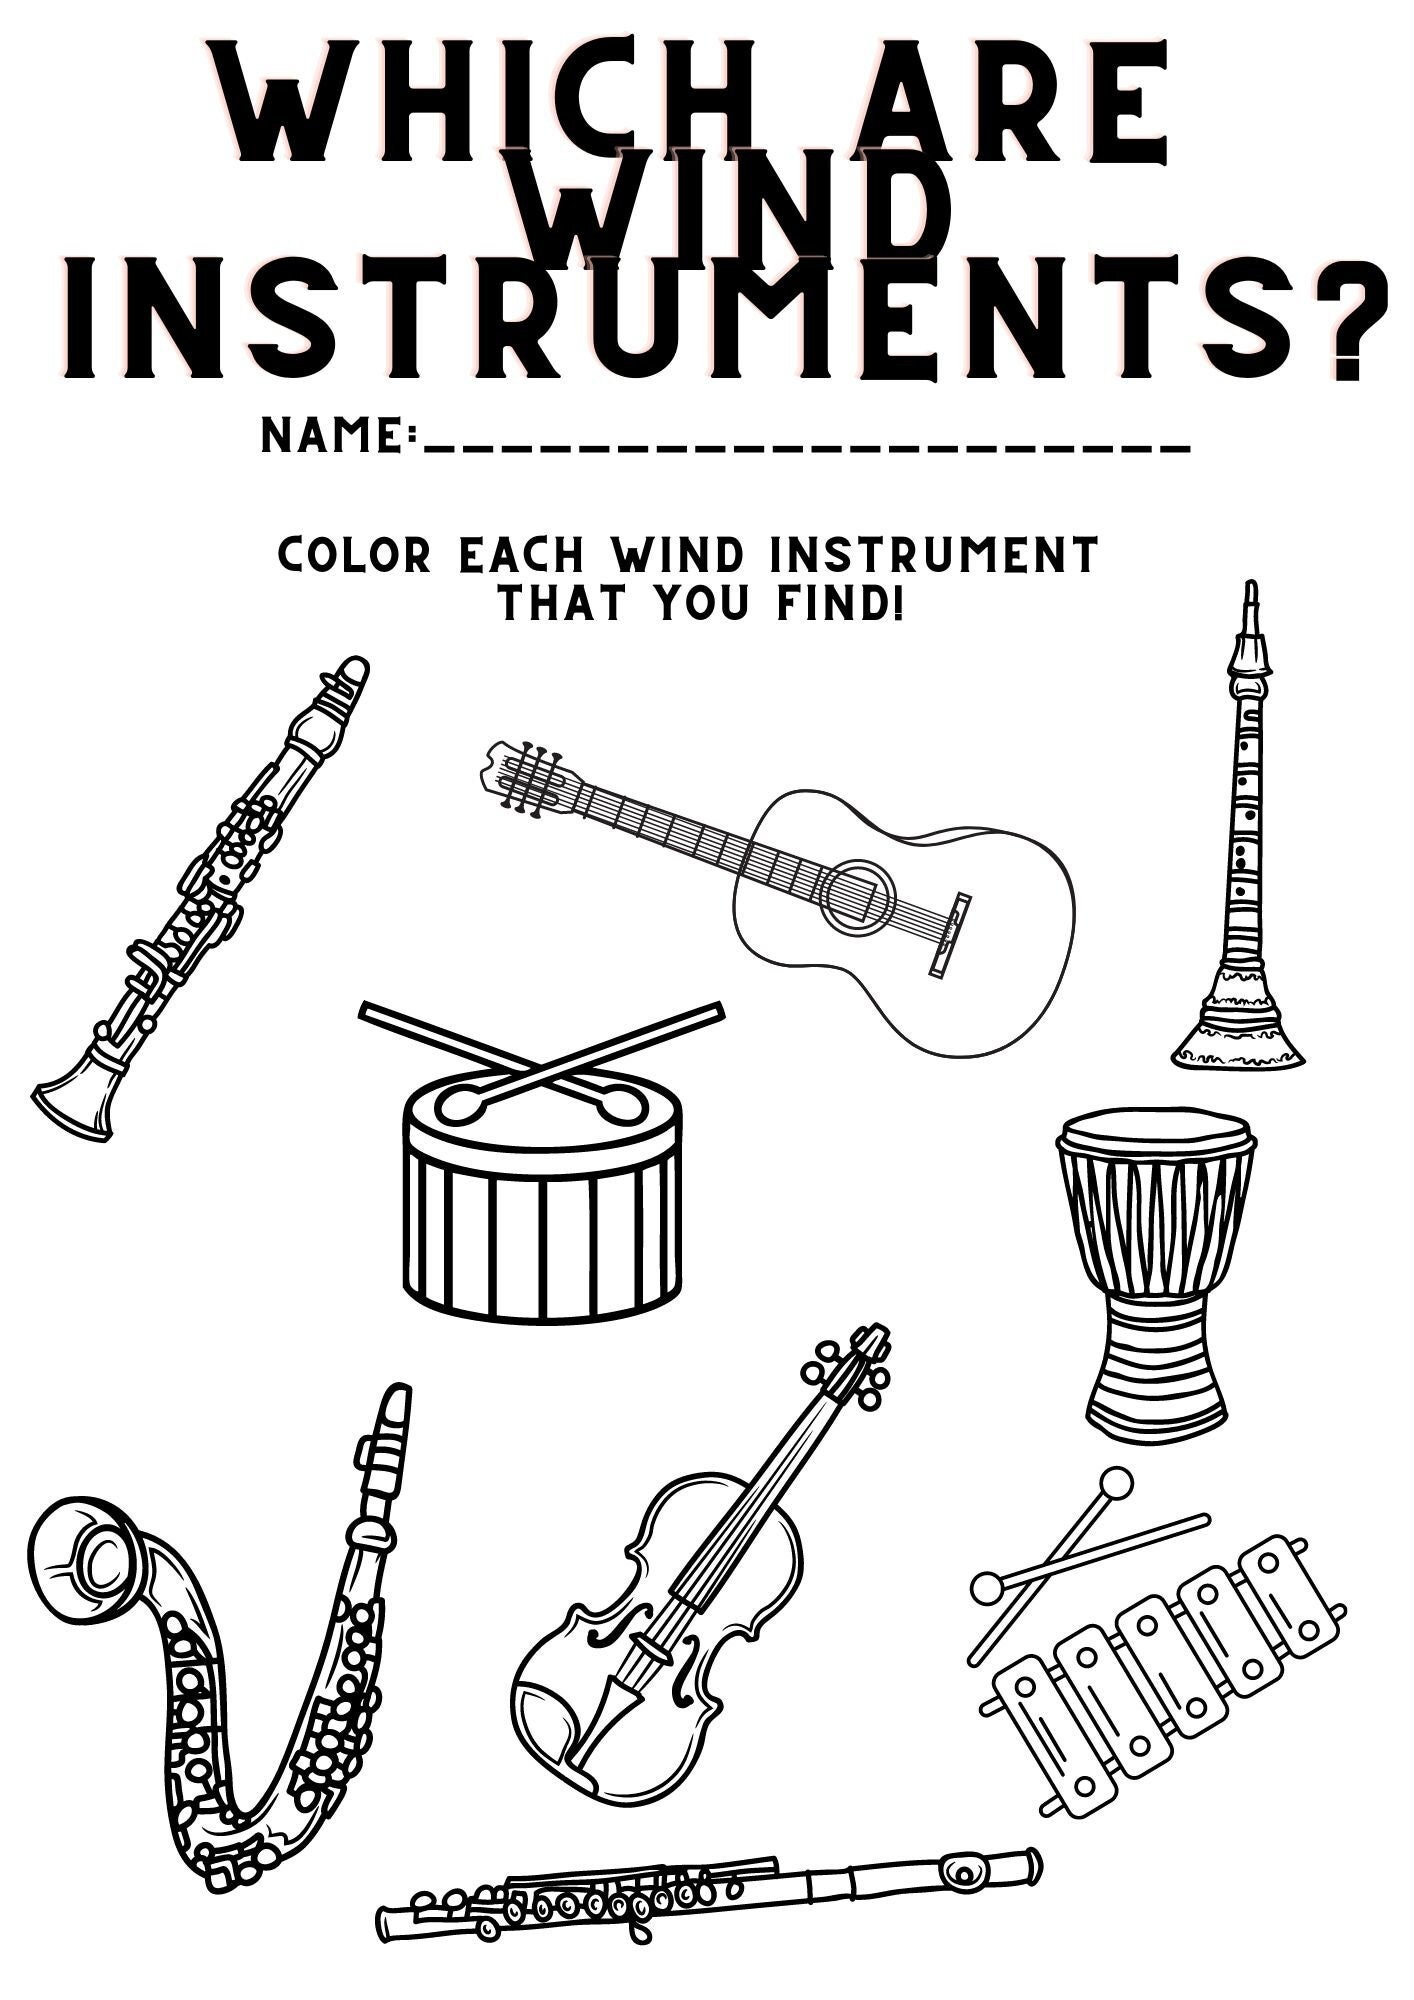 wind instruments names